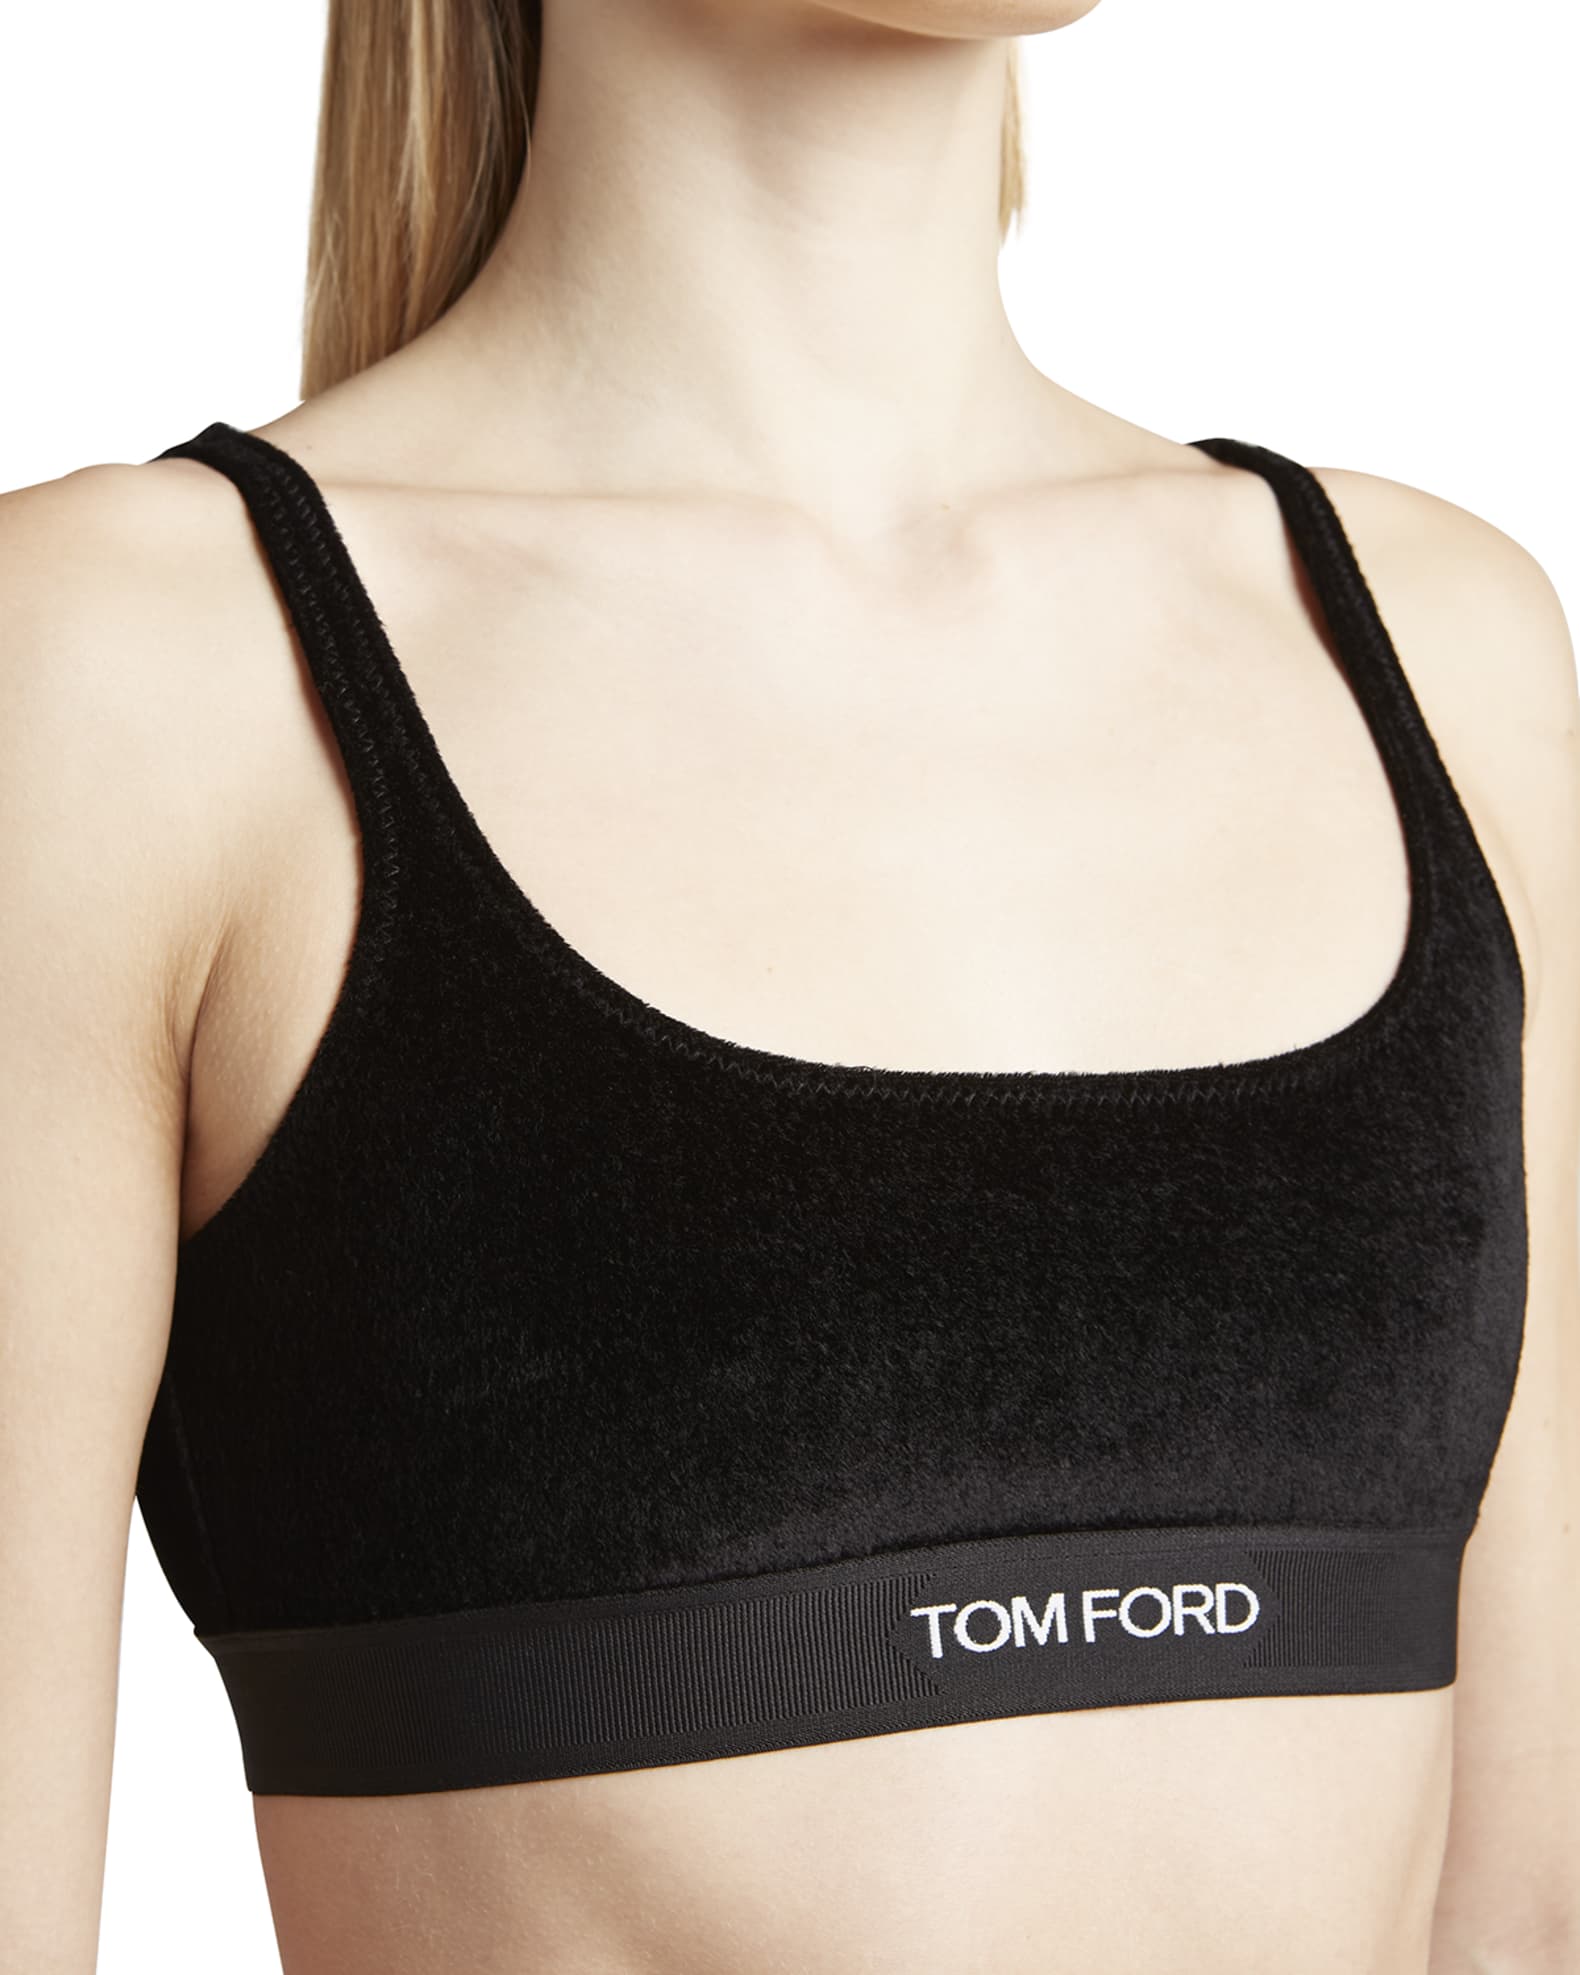 This Tom Ford velvet bralette is the perfect combination of